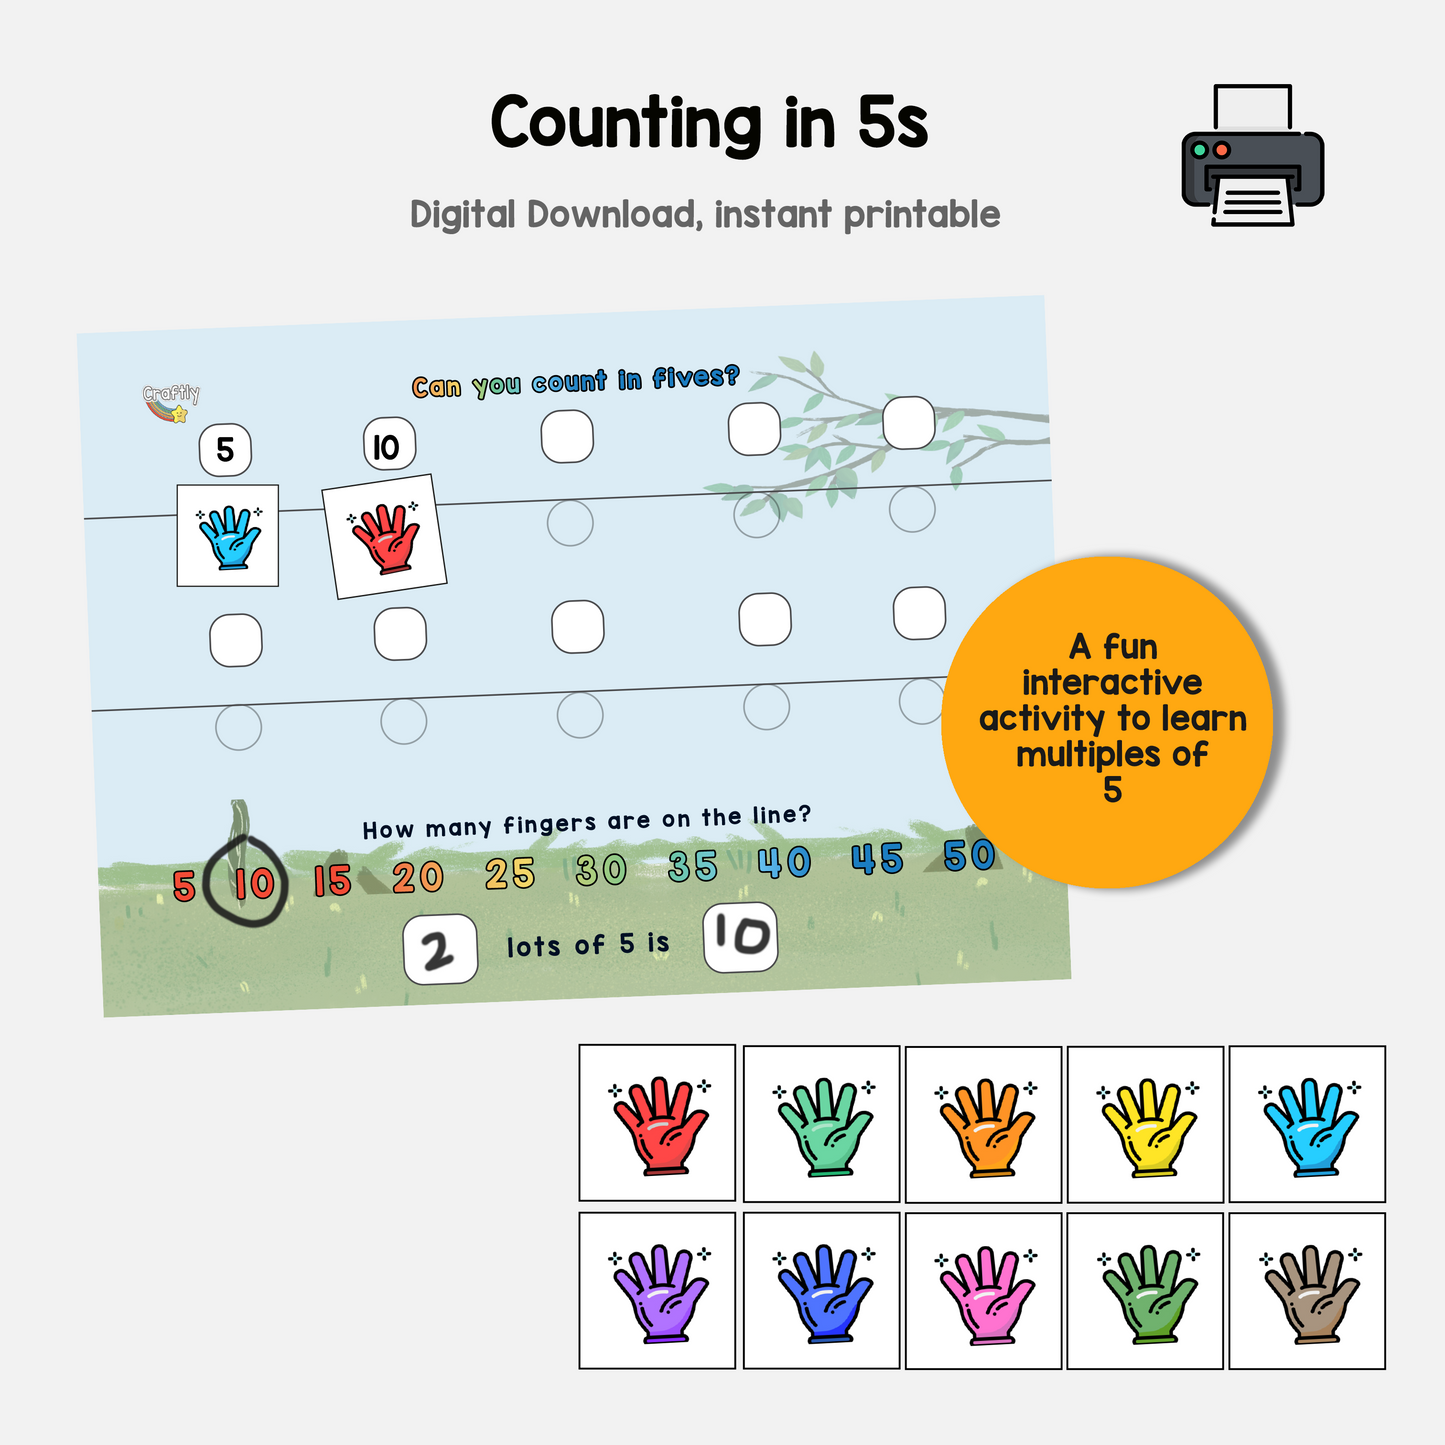 Counting in 5s Activity (S)